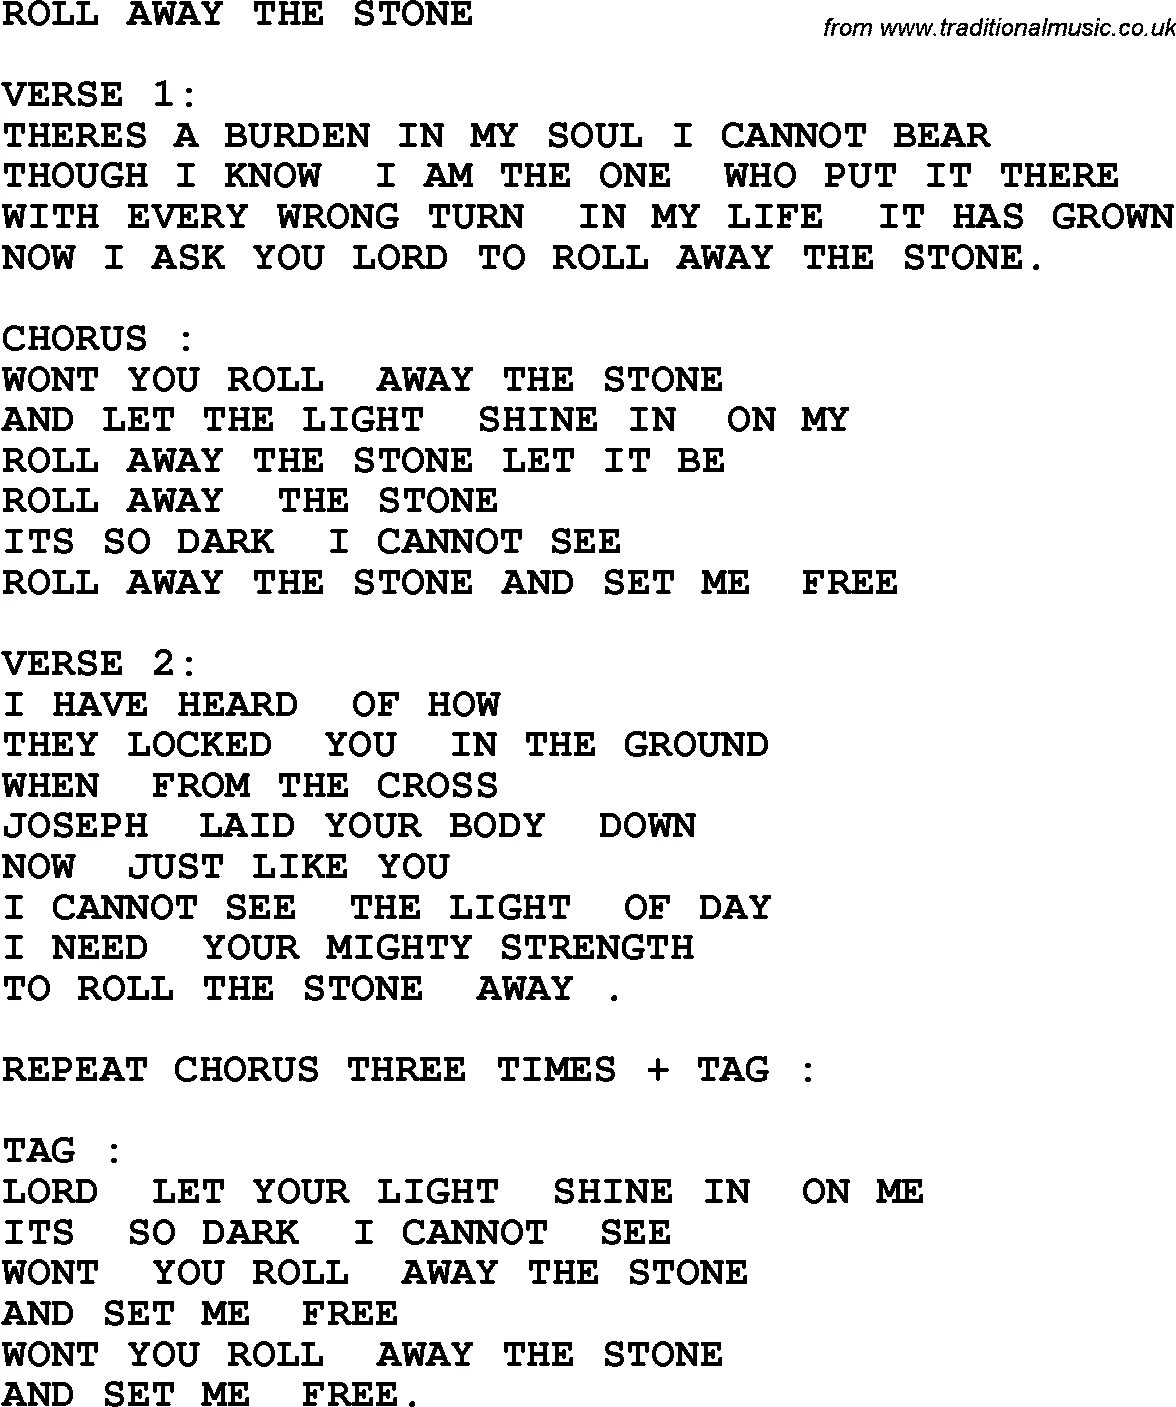 Roll lyrics. Roll away. Starring Stone текст. Ноты the Angel rolled the Stone away. Bluegrass Gospel Lyrics and Chords.